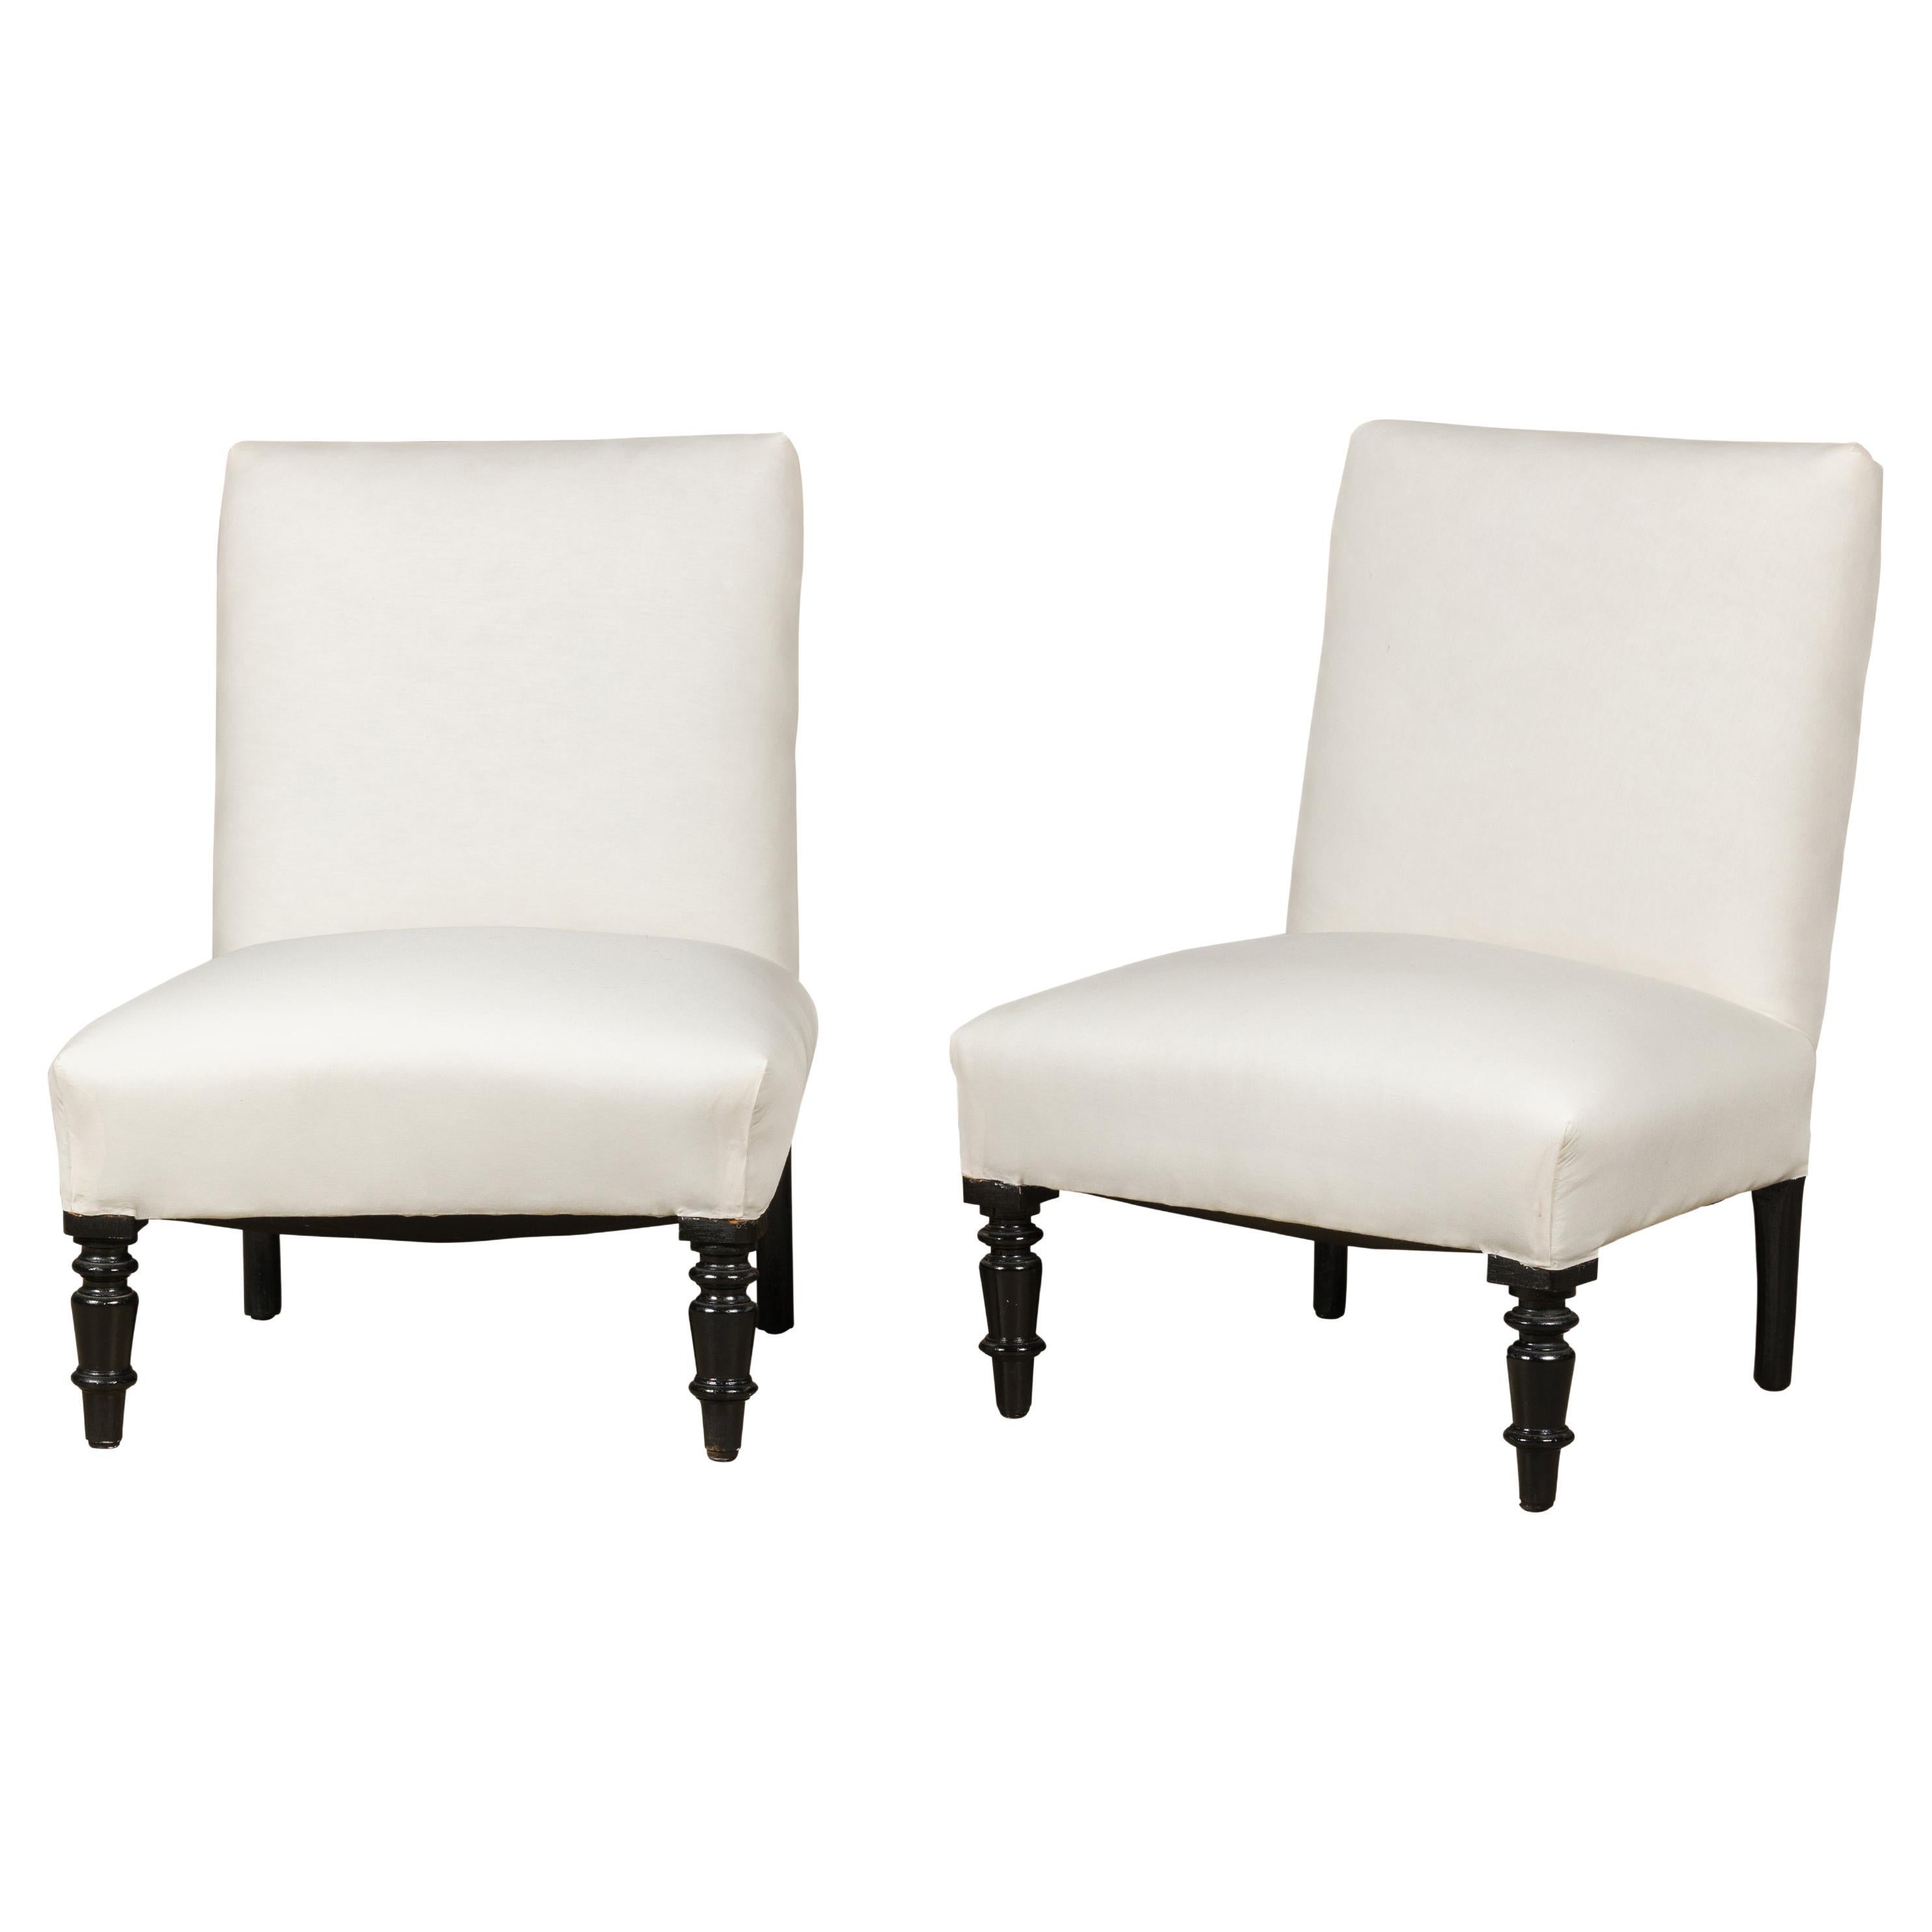 French Turn of the Century Slipper Chairs with Ebonized Turned Legs, a Pair